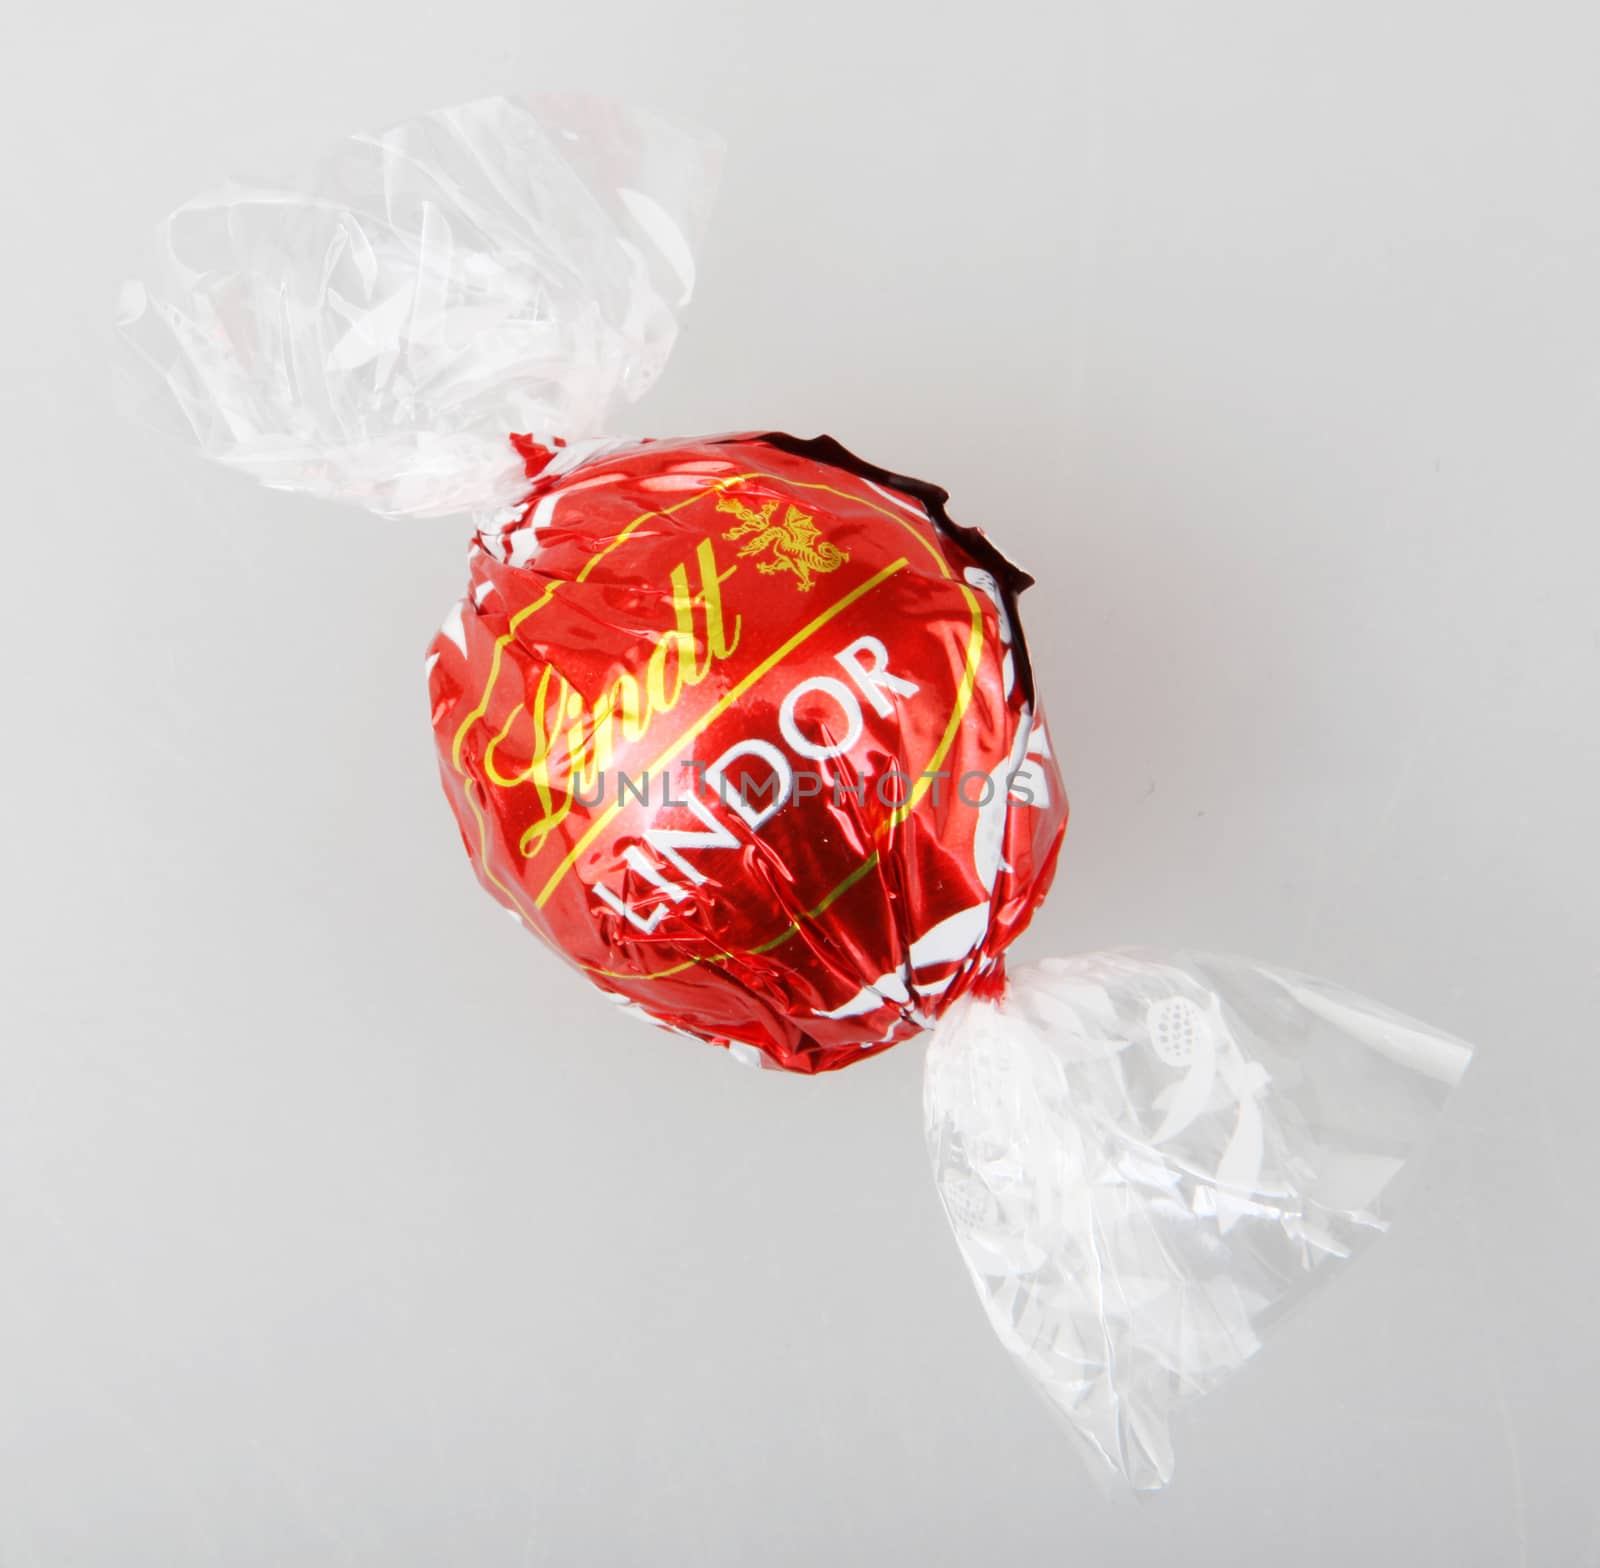 Pomorie, Bulgaria - May 16, 2019: Milk Chocolate Lindor Truffle. Lindt Is Recognized As A Leader In The Market For Premium Quality Chocolate.